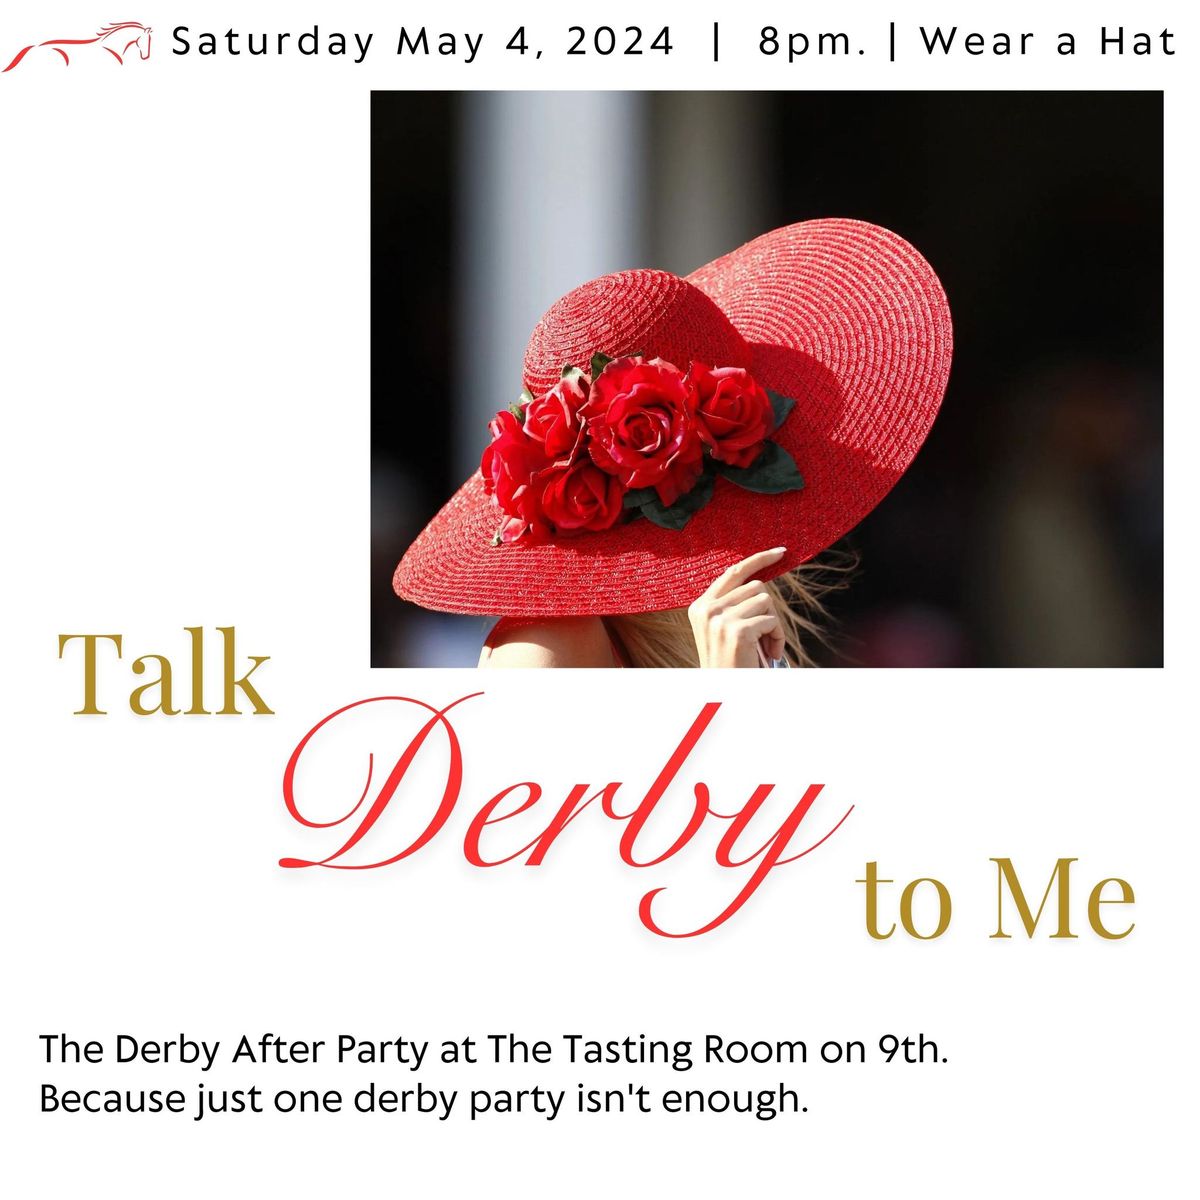 The Derby After Party at TTR